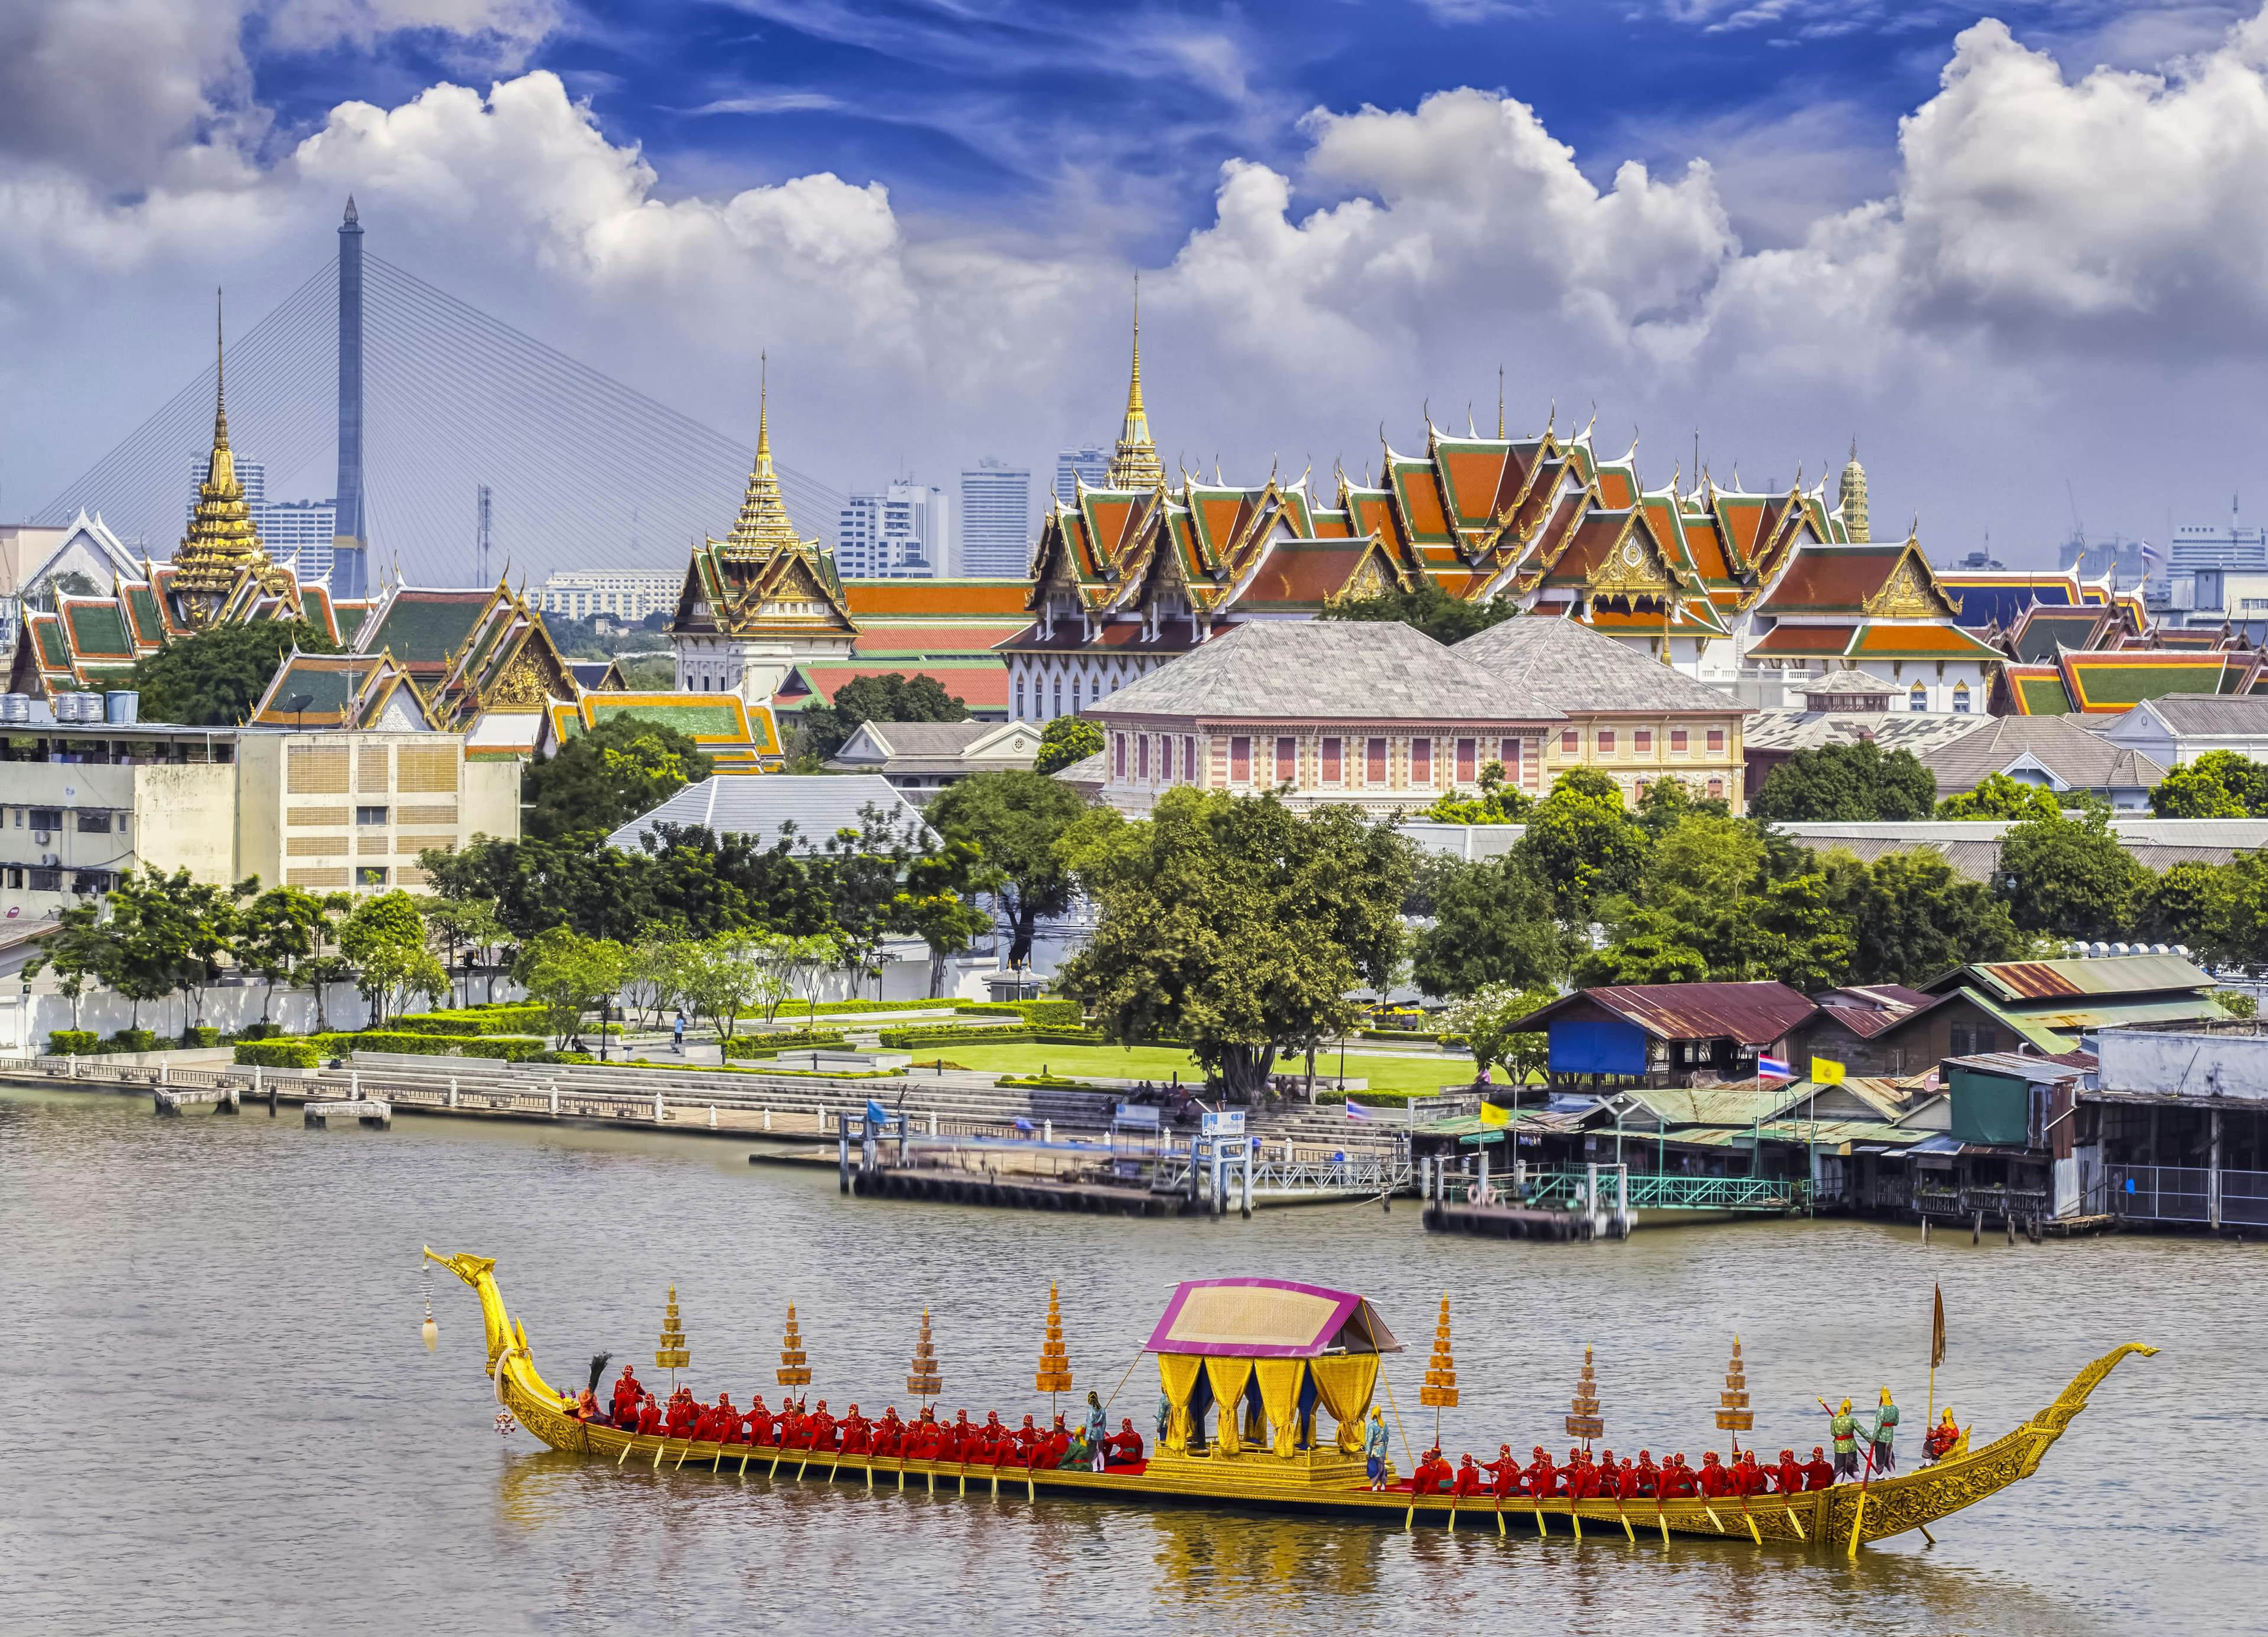 Bangkok’s Old Town and Temples: The forgotten heritage image